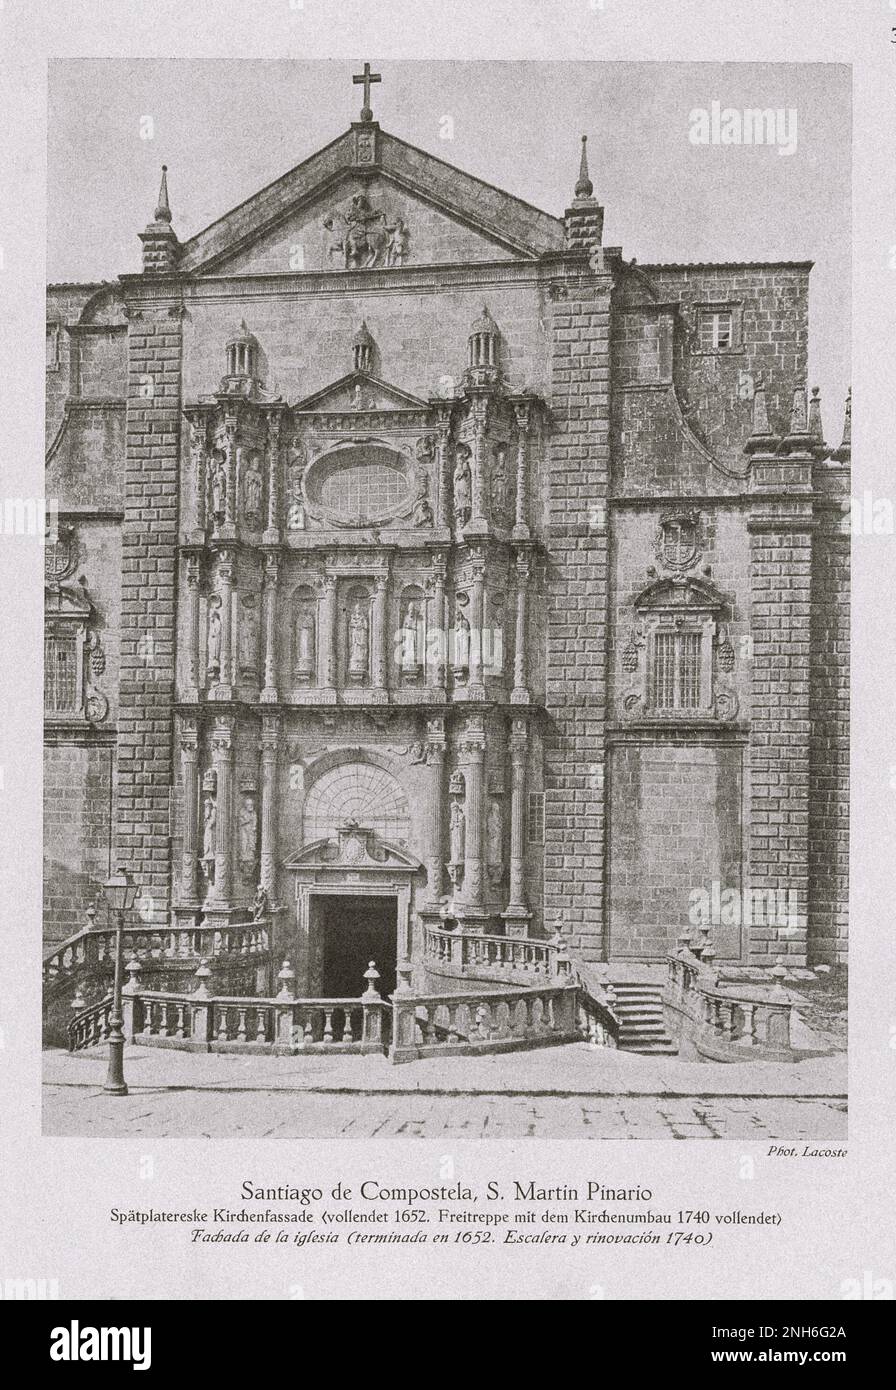 Architecture of Old Spain. Vintage photo of St. Martin Pinario in Santiago de Compostela.  The monastery of San Martiño Pinario (San Martín Pinario in Castilian) was a Benedictine monastery in the city of Santiago de Compostela, Galicia, Spain. Stock Photo